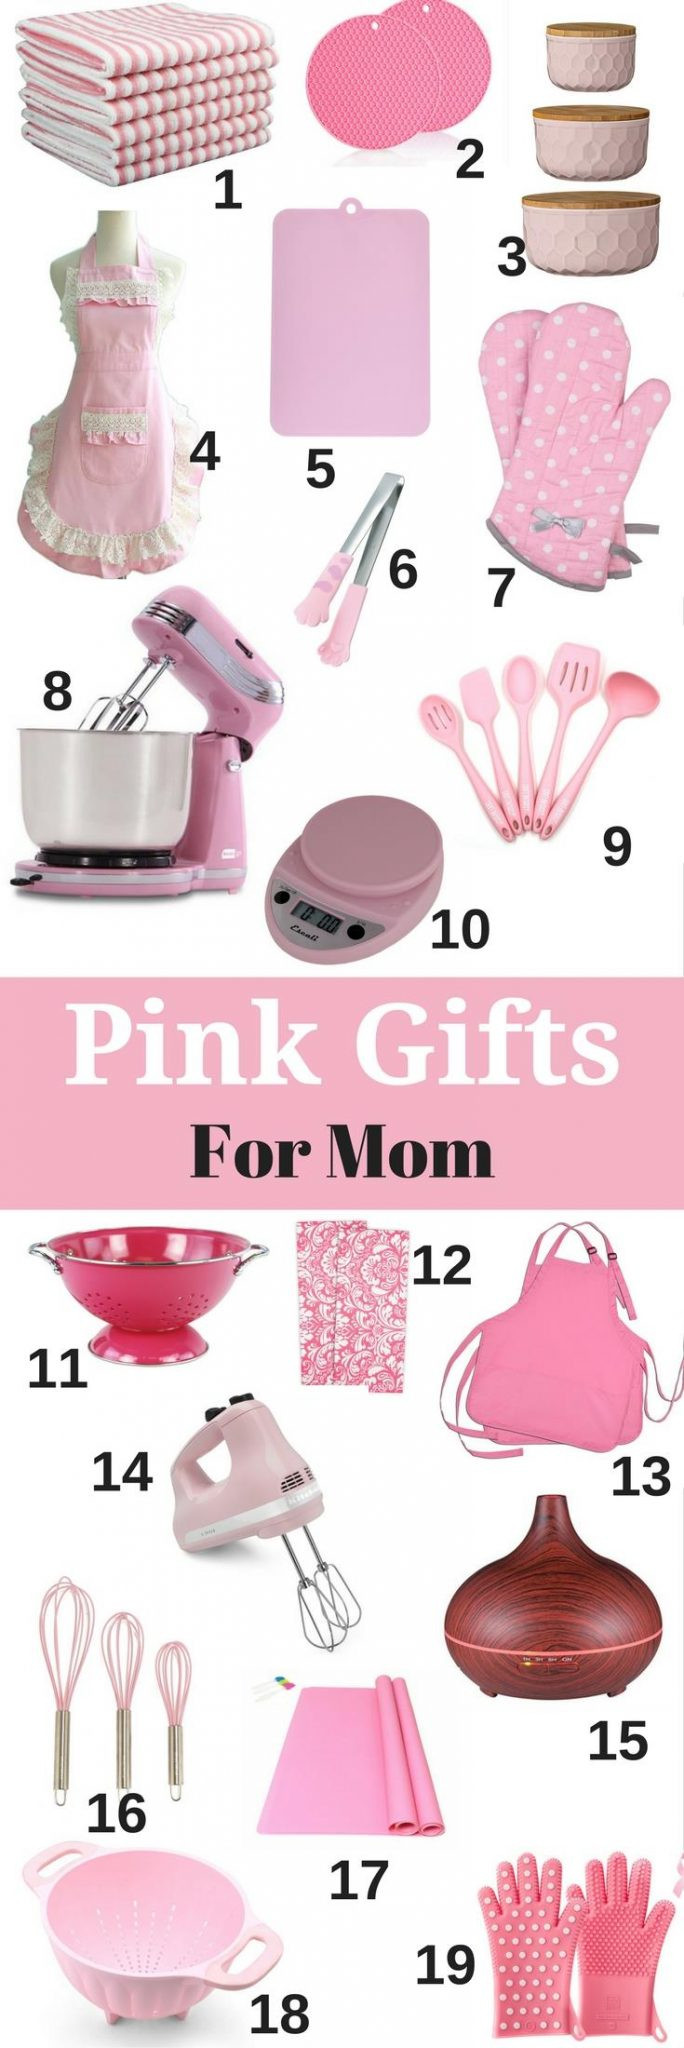 Birthday Gift For Mom Ideas
 Pink Gifts for Mom the Best Gift Ideas for Mother s Day